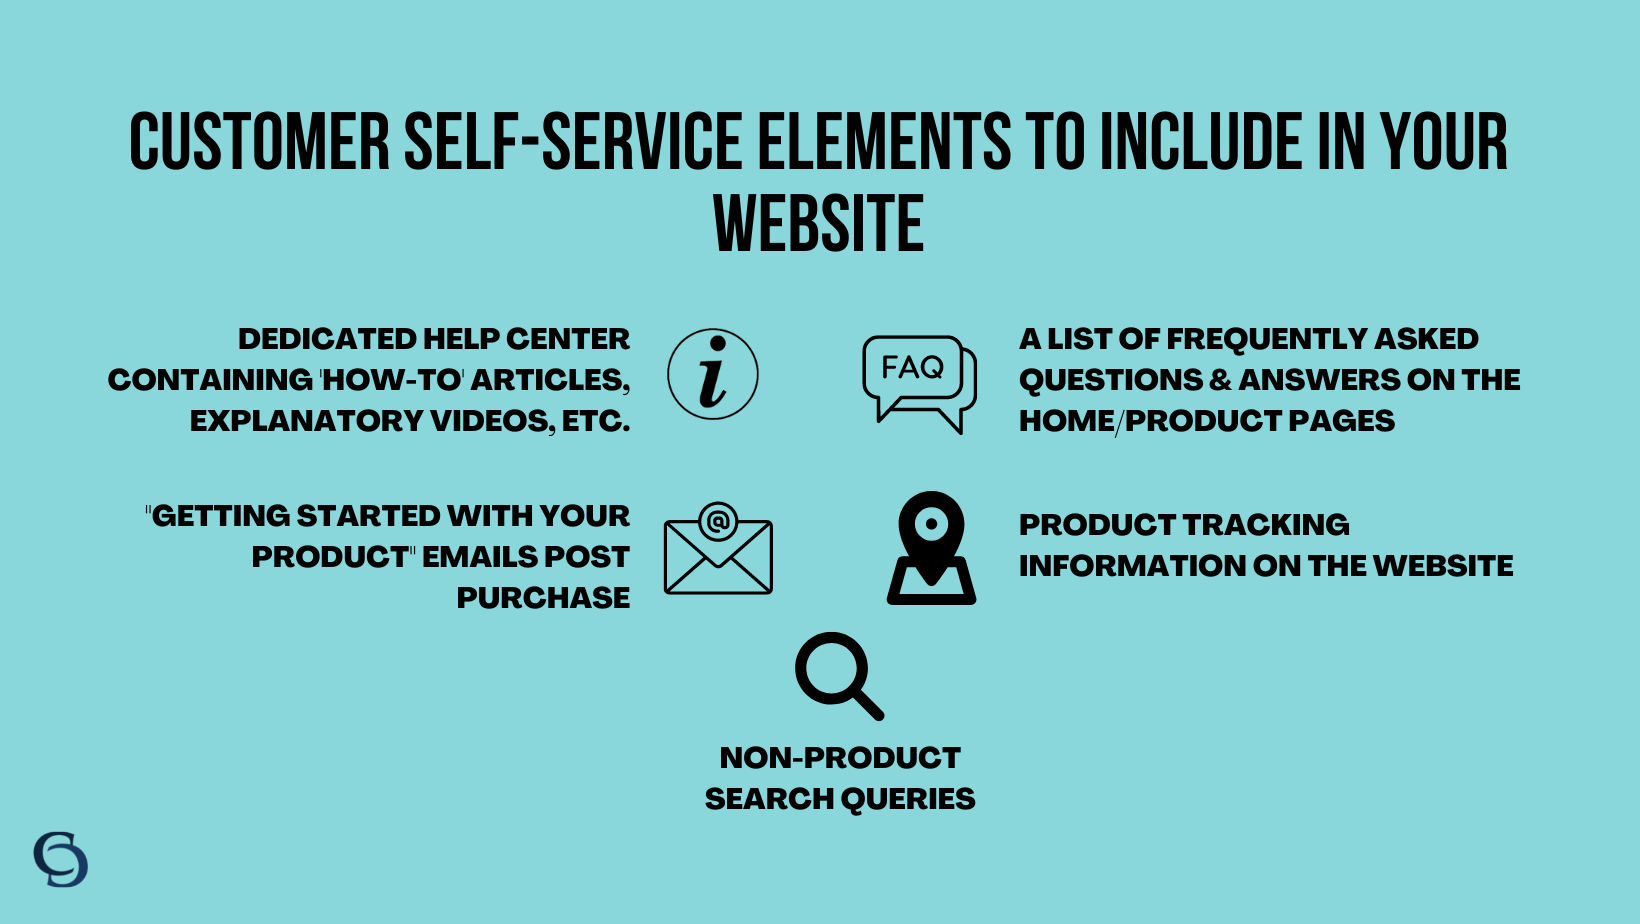 Customer self-service elements to include in your website